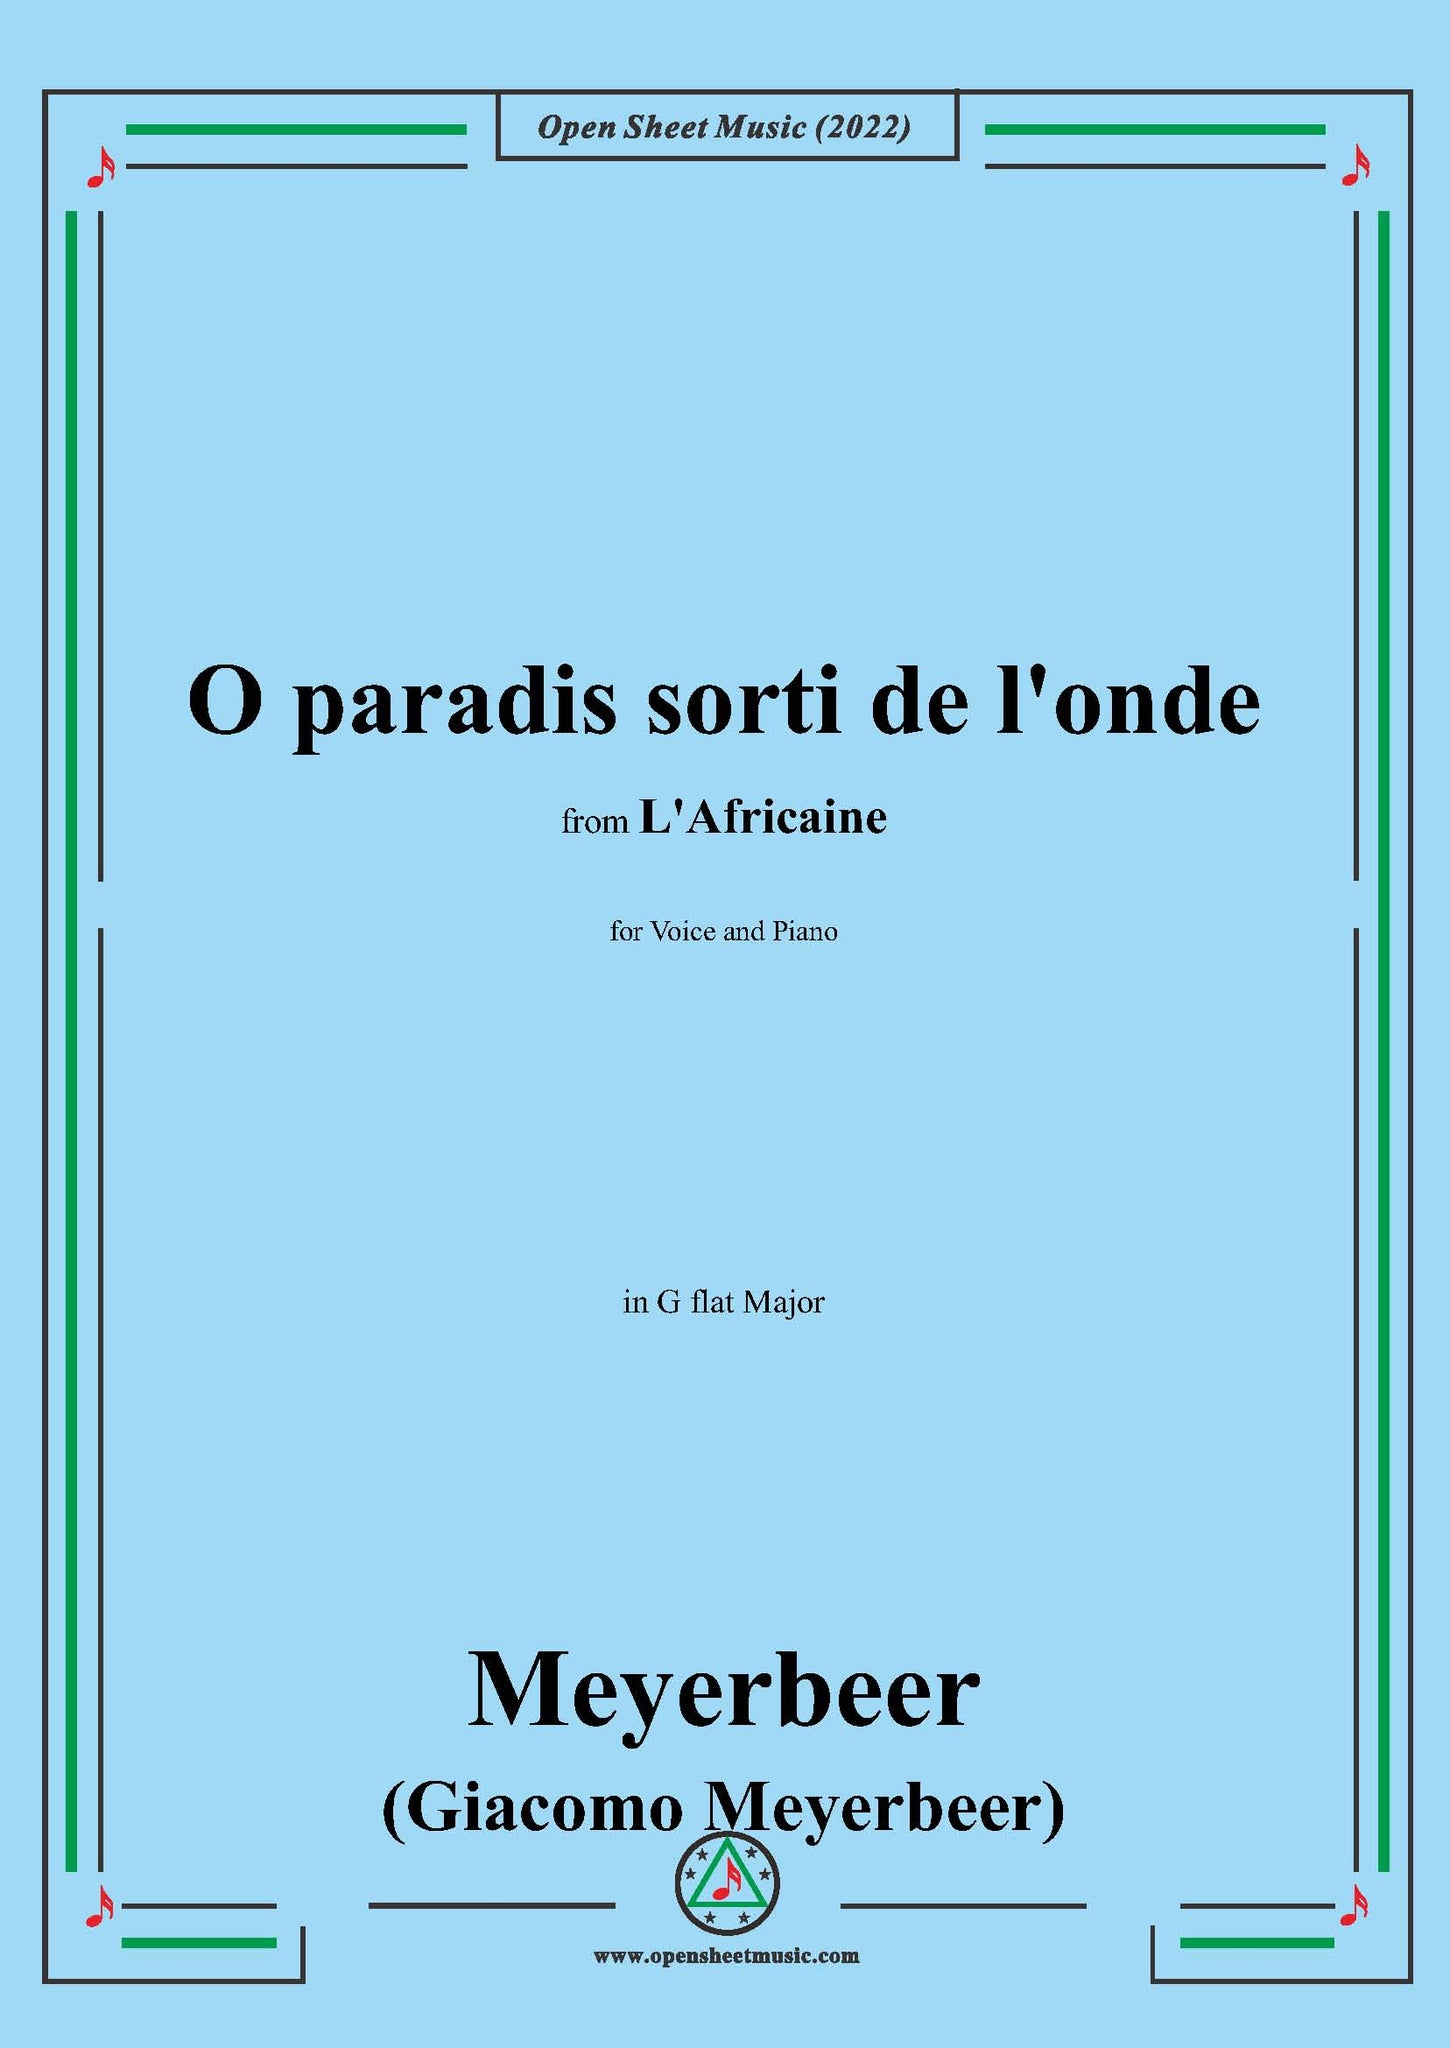 Meyerbeer O Paradis Sorti De L'Onde,In G Flat Major,From L'Africaine,F –  Open Sheet Music